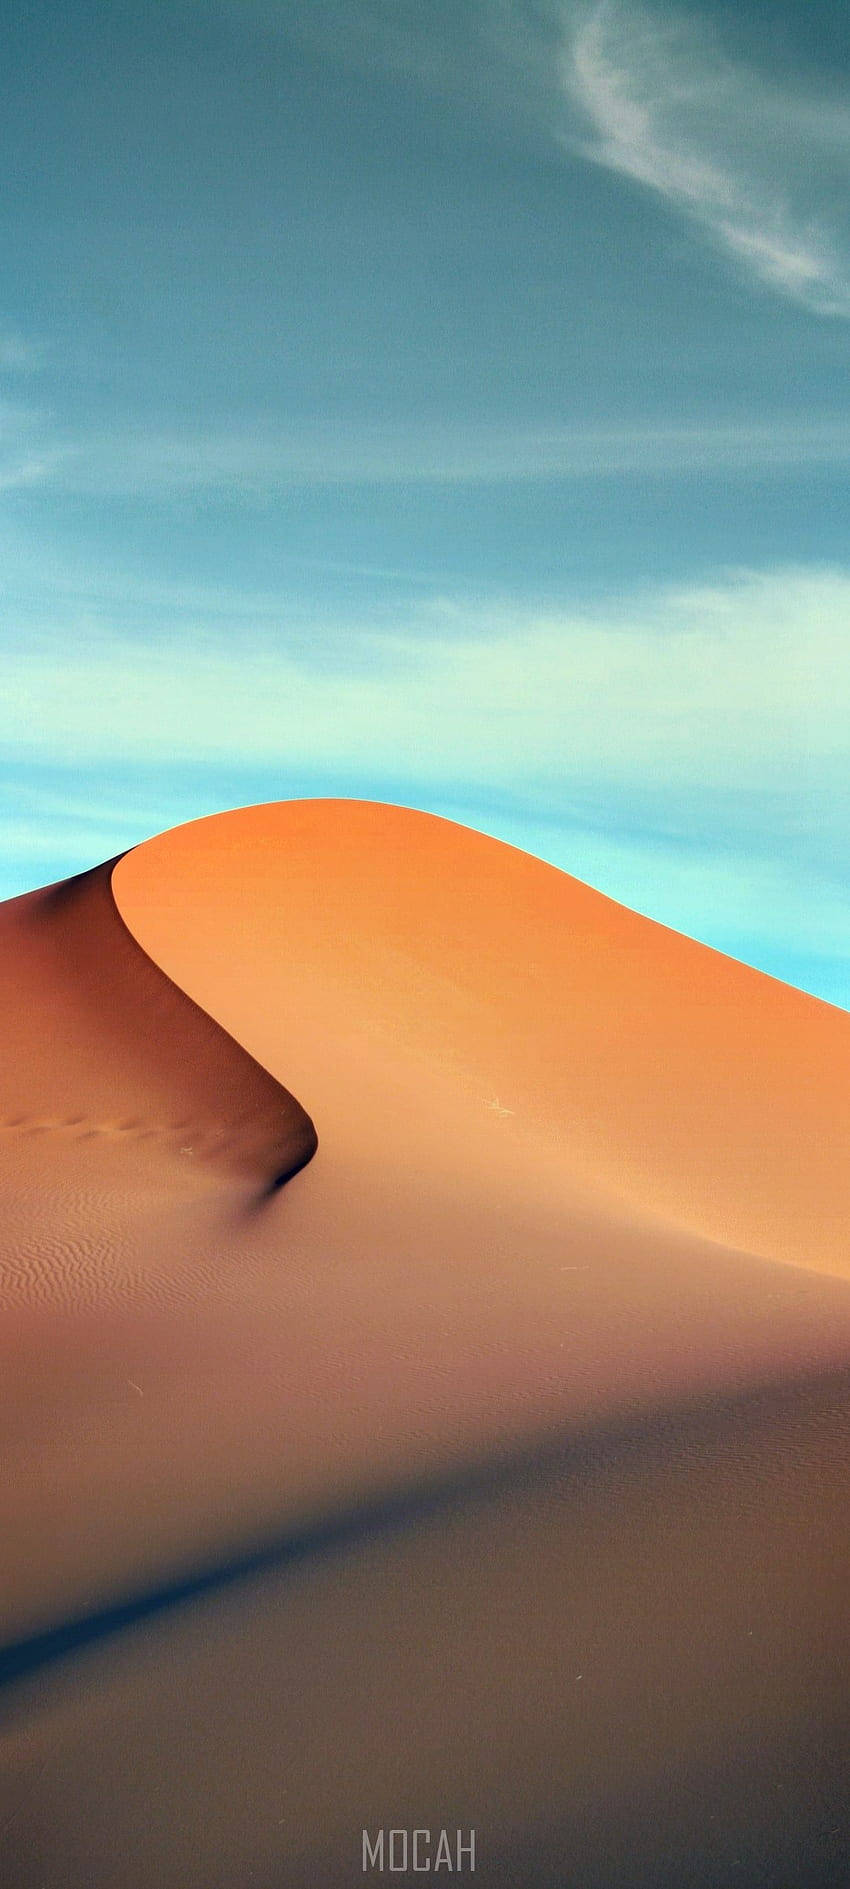 Captivating Shot Of The Stunning Realme 7 Pro With Sand Dune Variant. Wallpaper